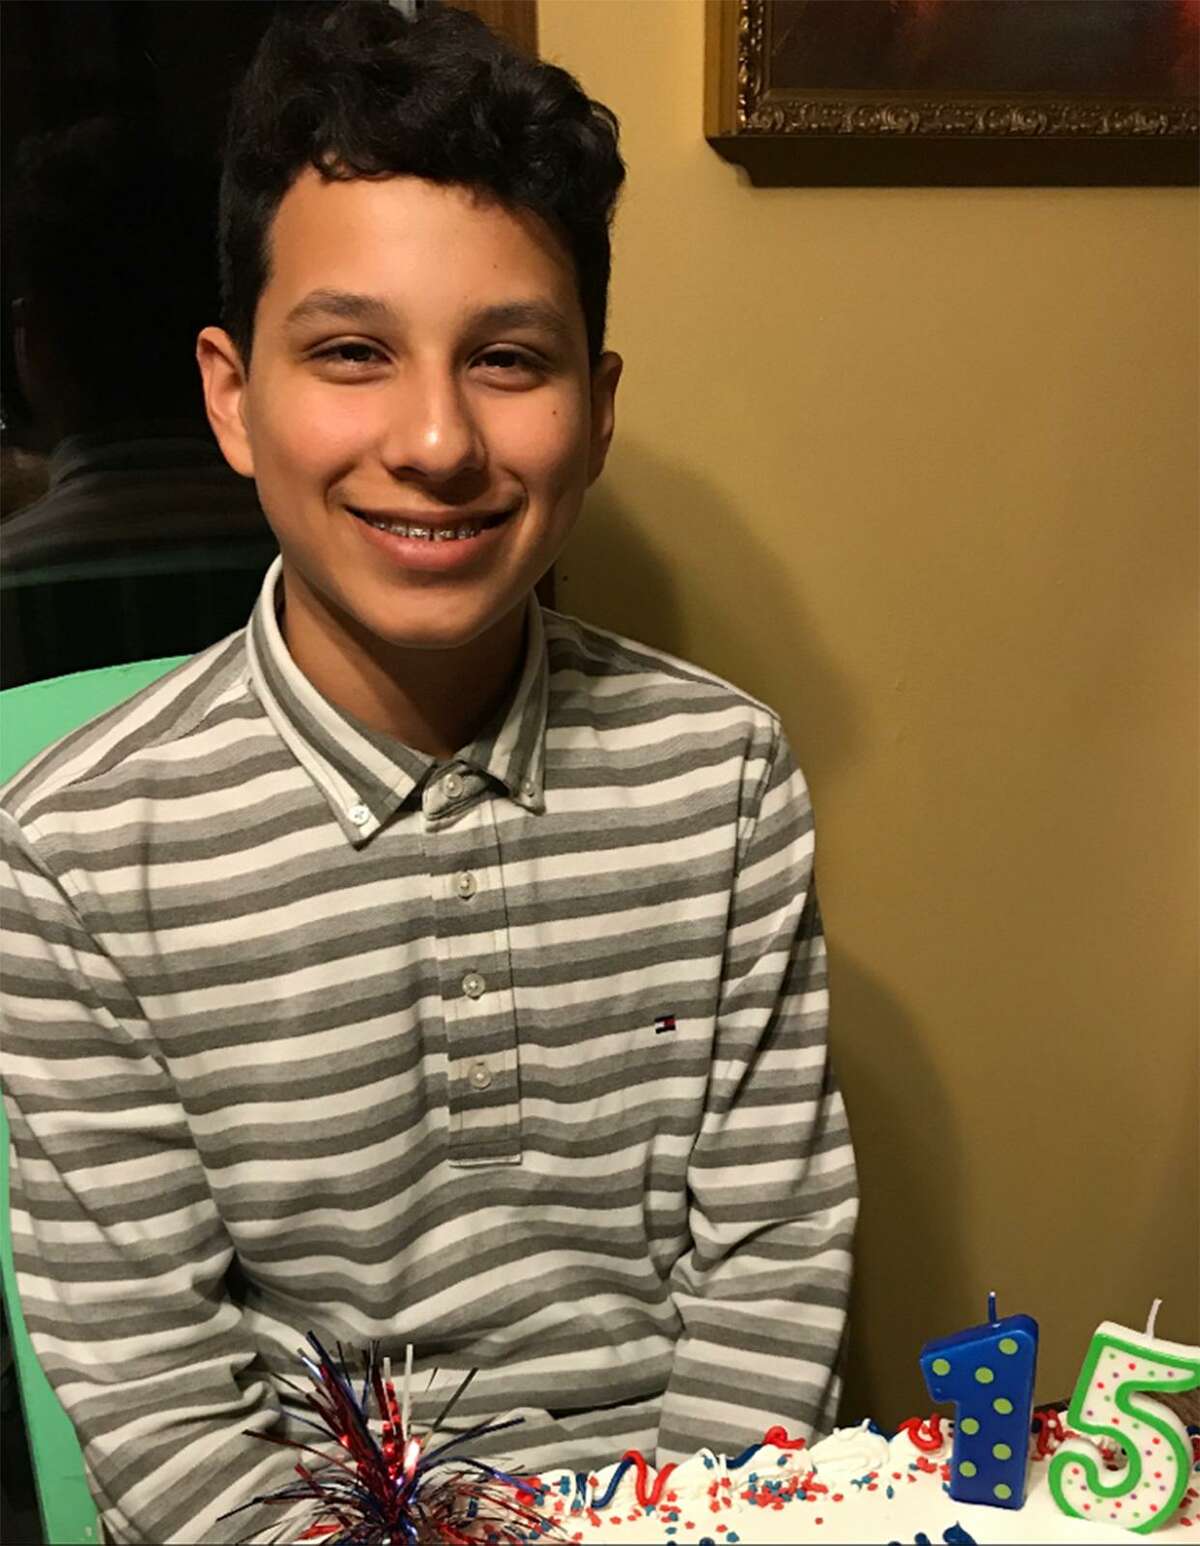 Isaiah Gonzalez is shown on his 15th birthday. His father believes he was drawn into a horrific online game and accidentally killed himself.